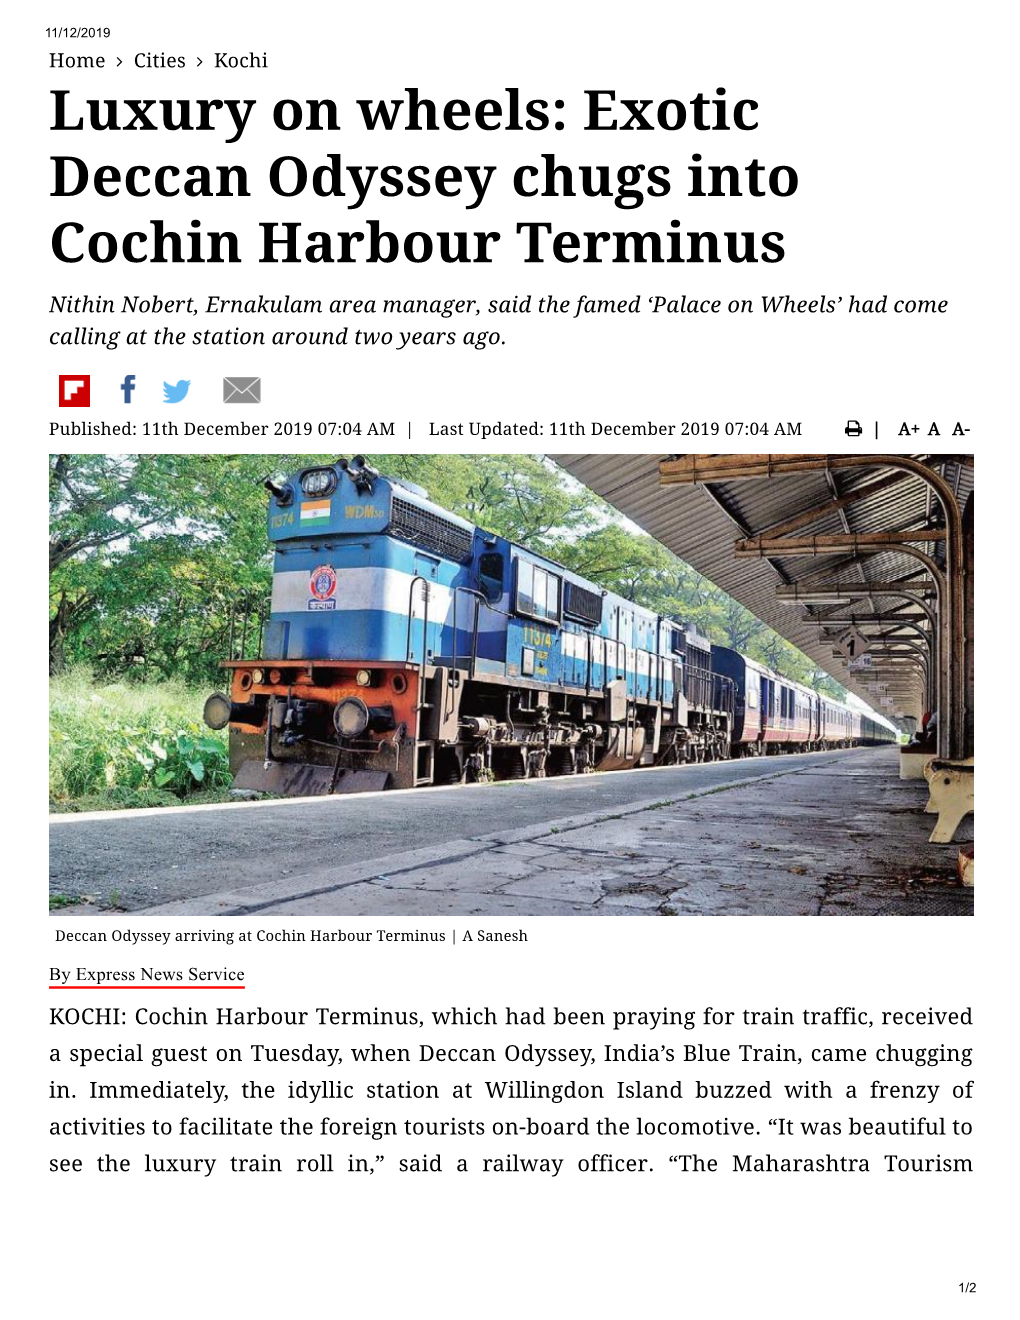 Exotic Deccan Odyssey Chugs Into Cochin Harbour Terminus